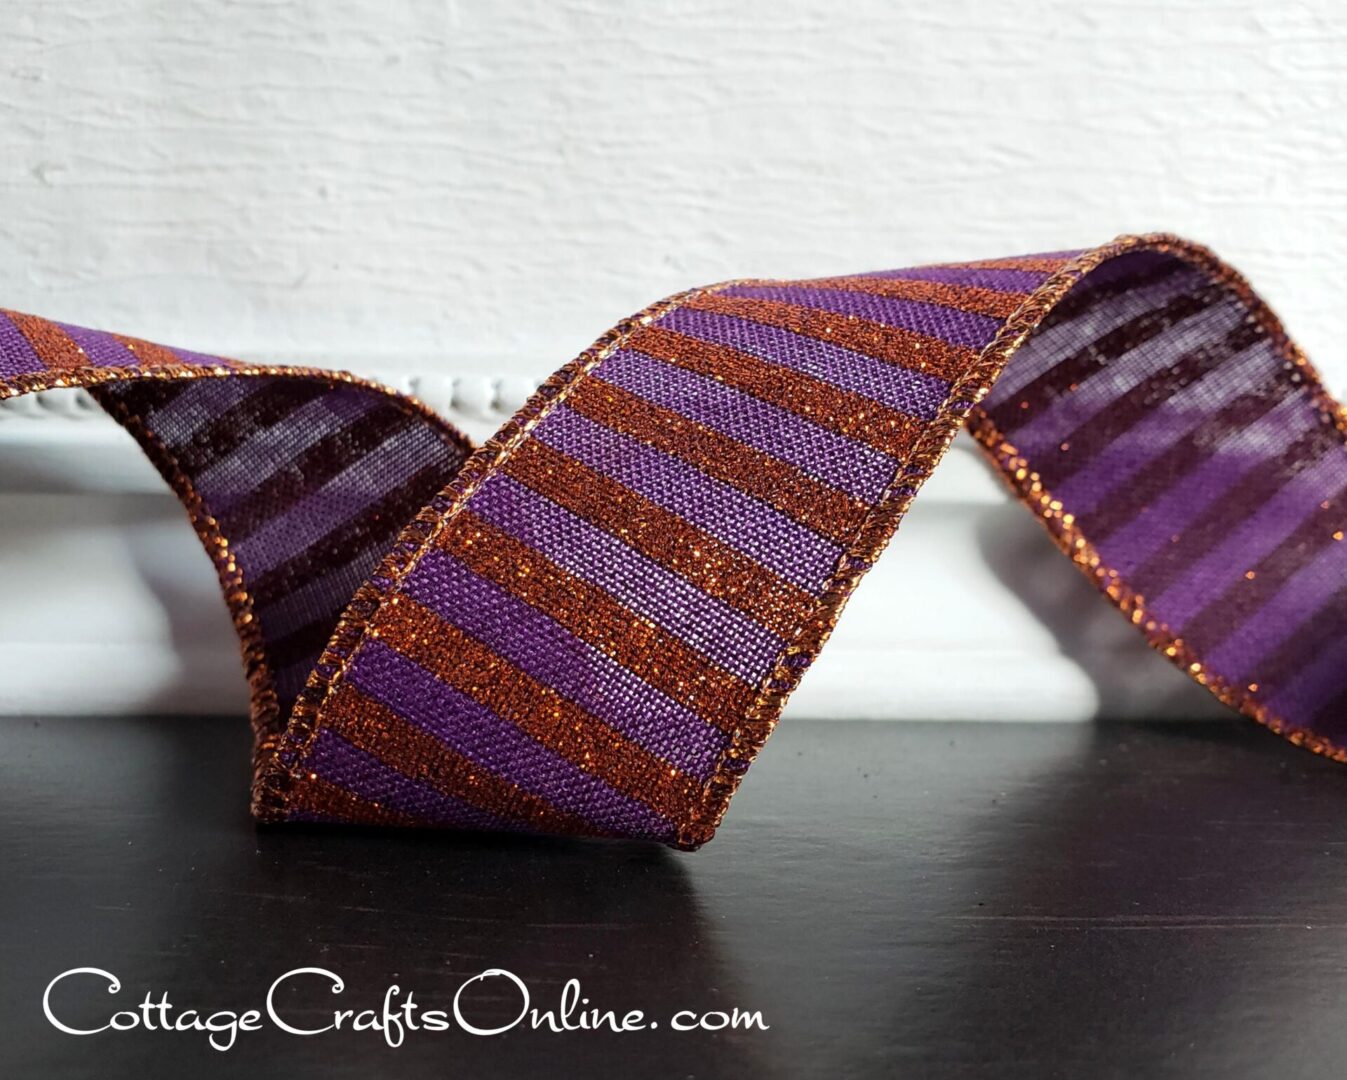 A purple and orange striped ribbon on a table.